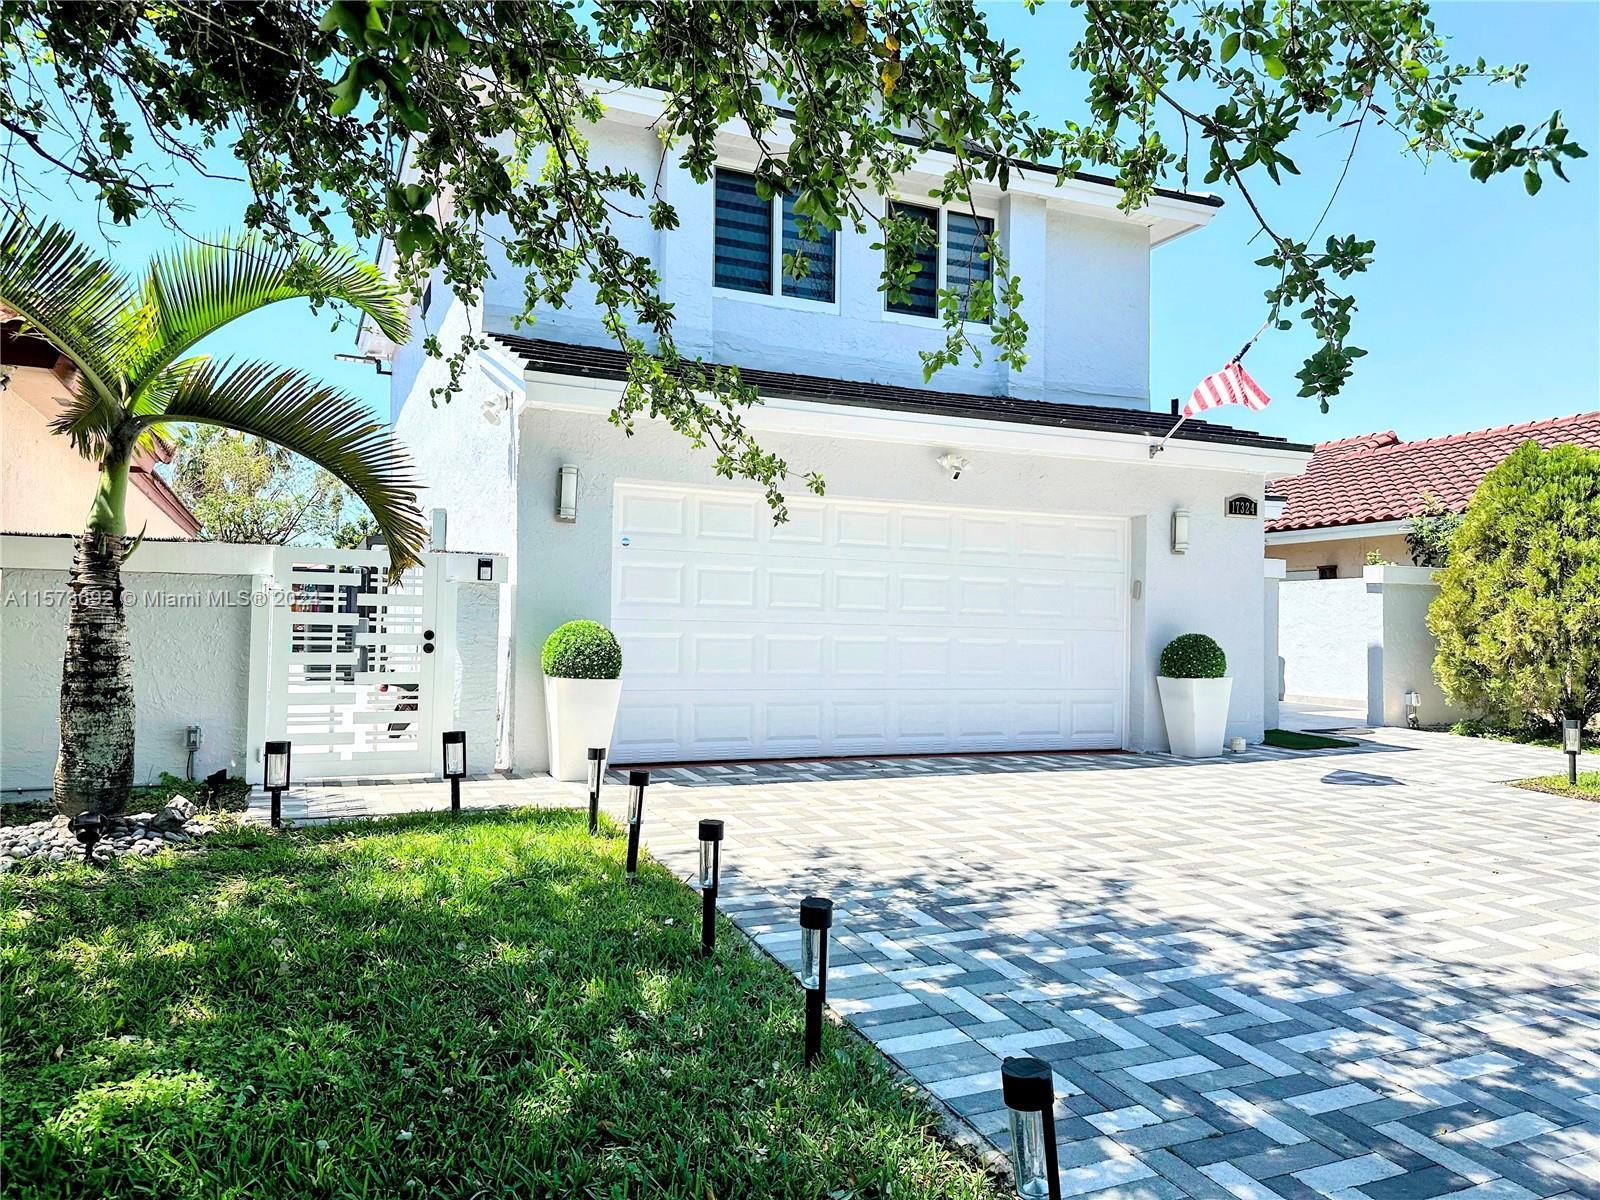 Property located in a central area of Miami Lakes, in the gated community of The Moors, an excellent